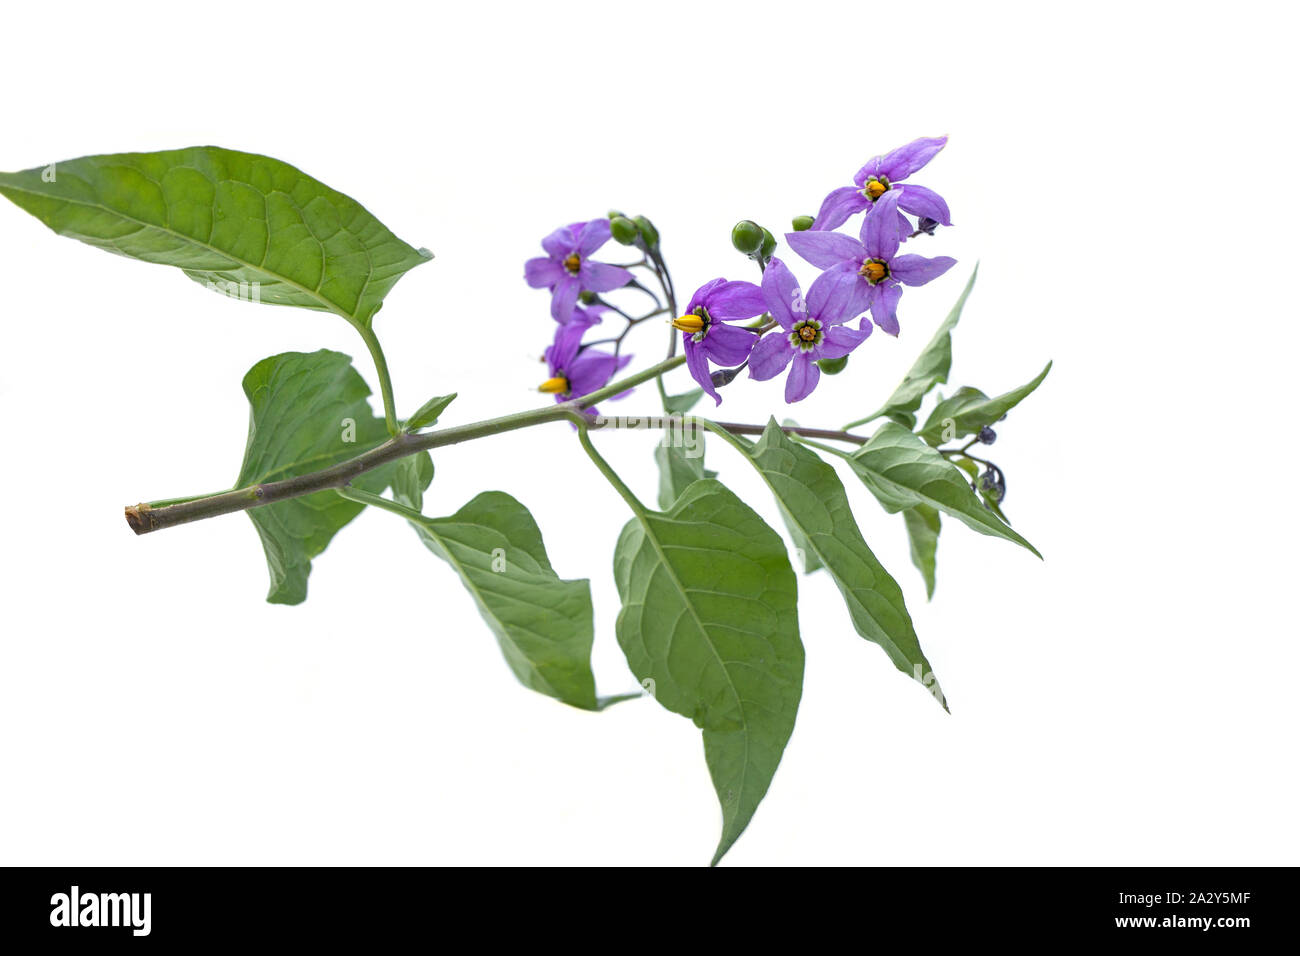 Deadly nightshade isolated on white background. Violet flower solanum dulcamara on stem with green leaves. berries are poisonous and are used for trea Stock Photo